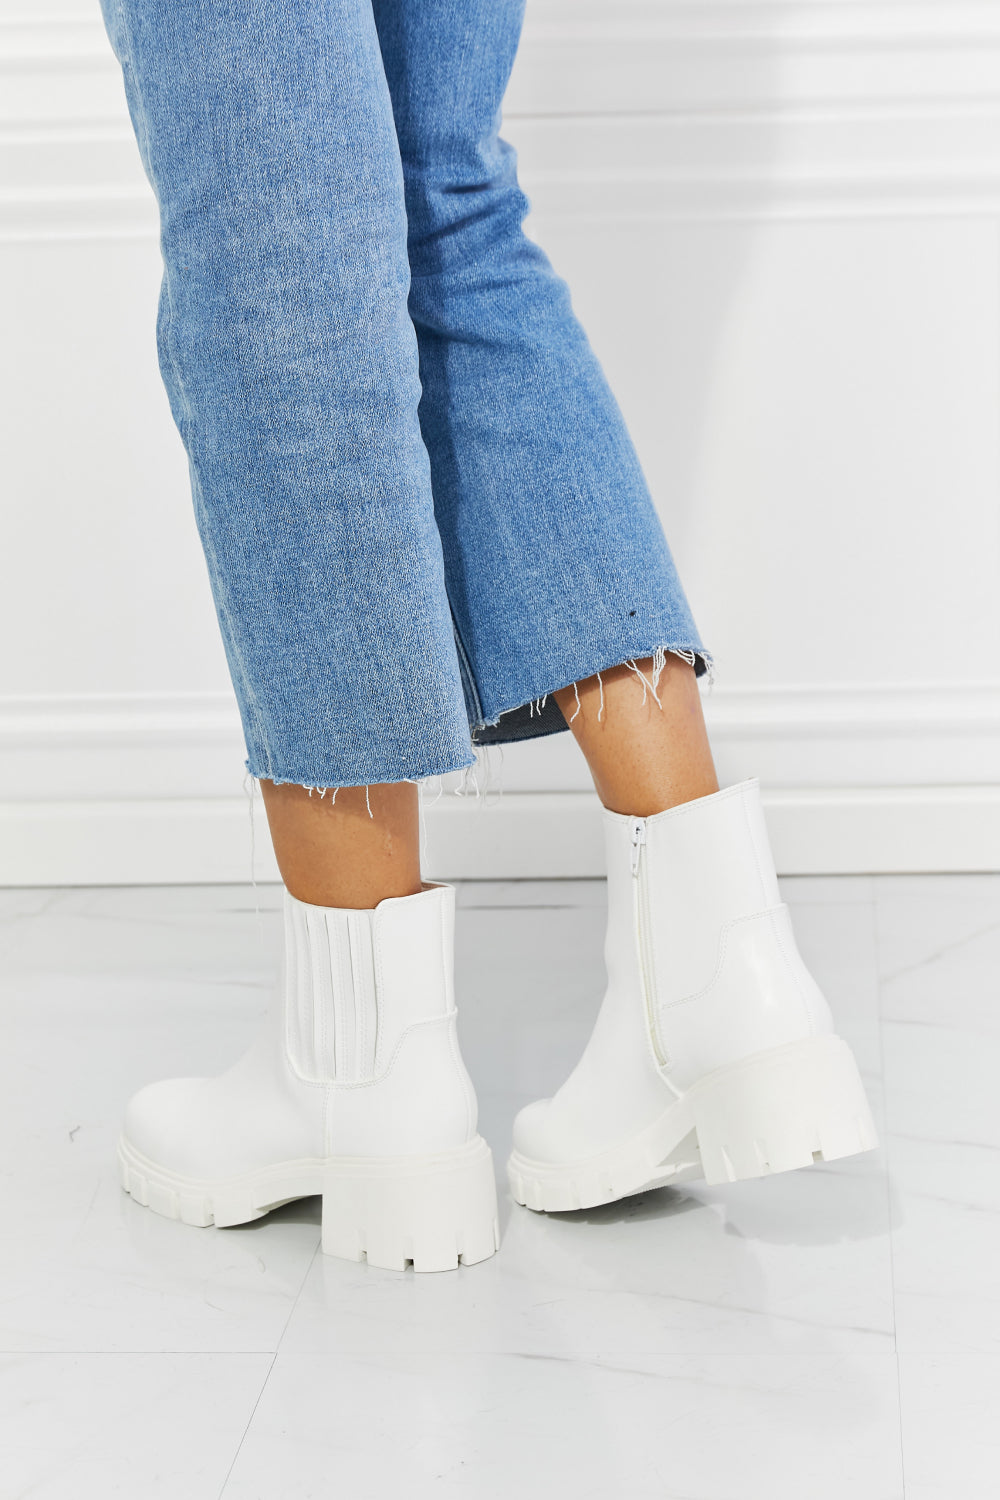 MMShoes What It Takes Lug Sole Chelsea Boots in White - nailedmoms